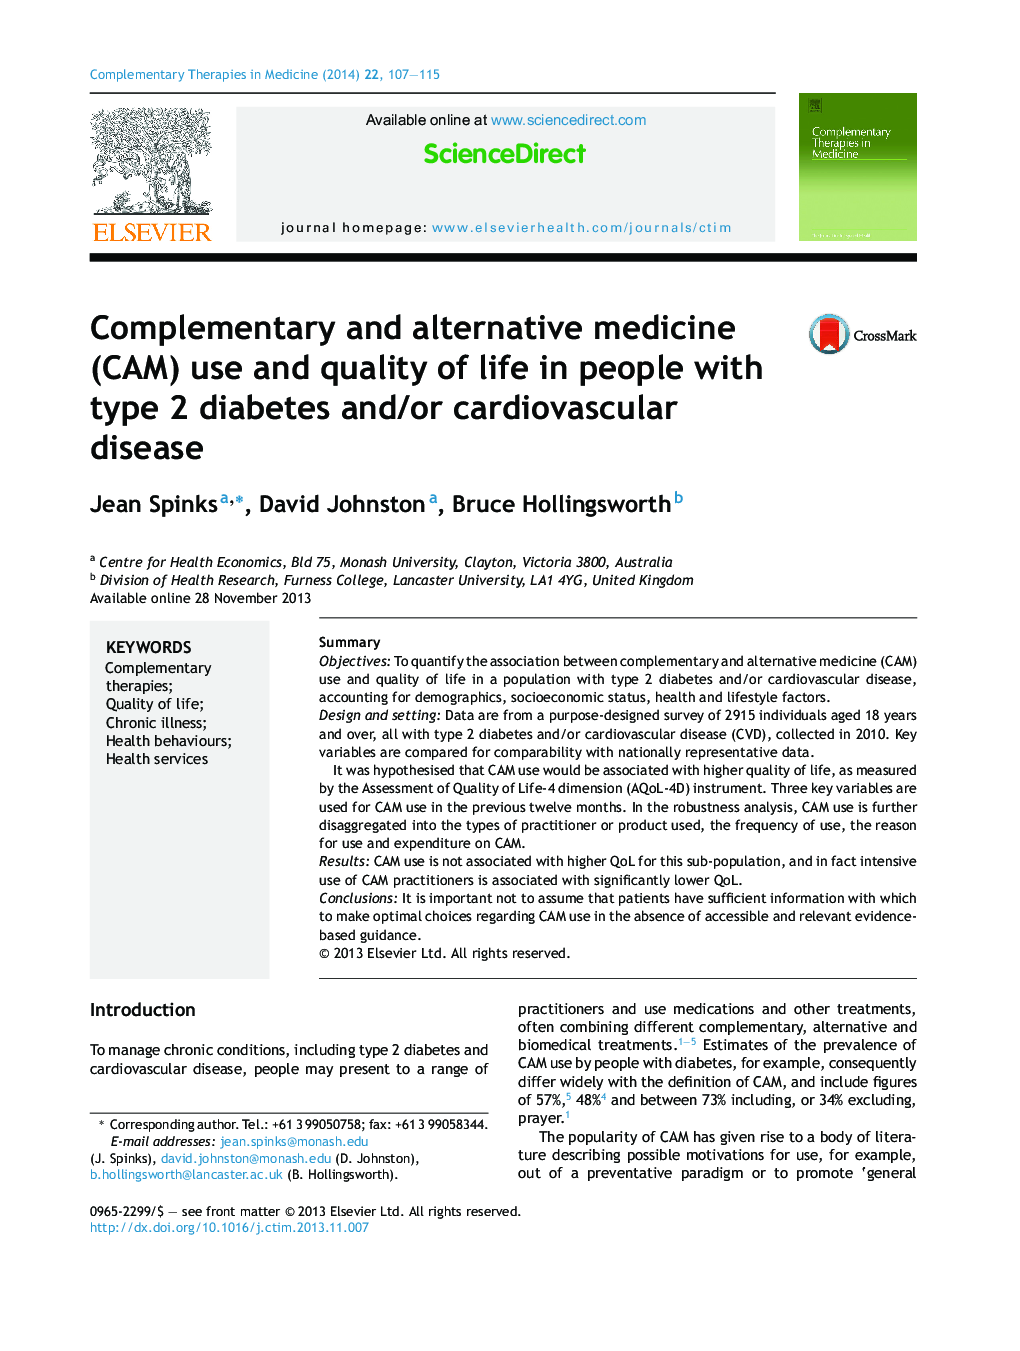 Complementary and alternative medicine (CAM) use and quality of life in people with type 2 diabetes and/or cardiovascular disease